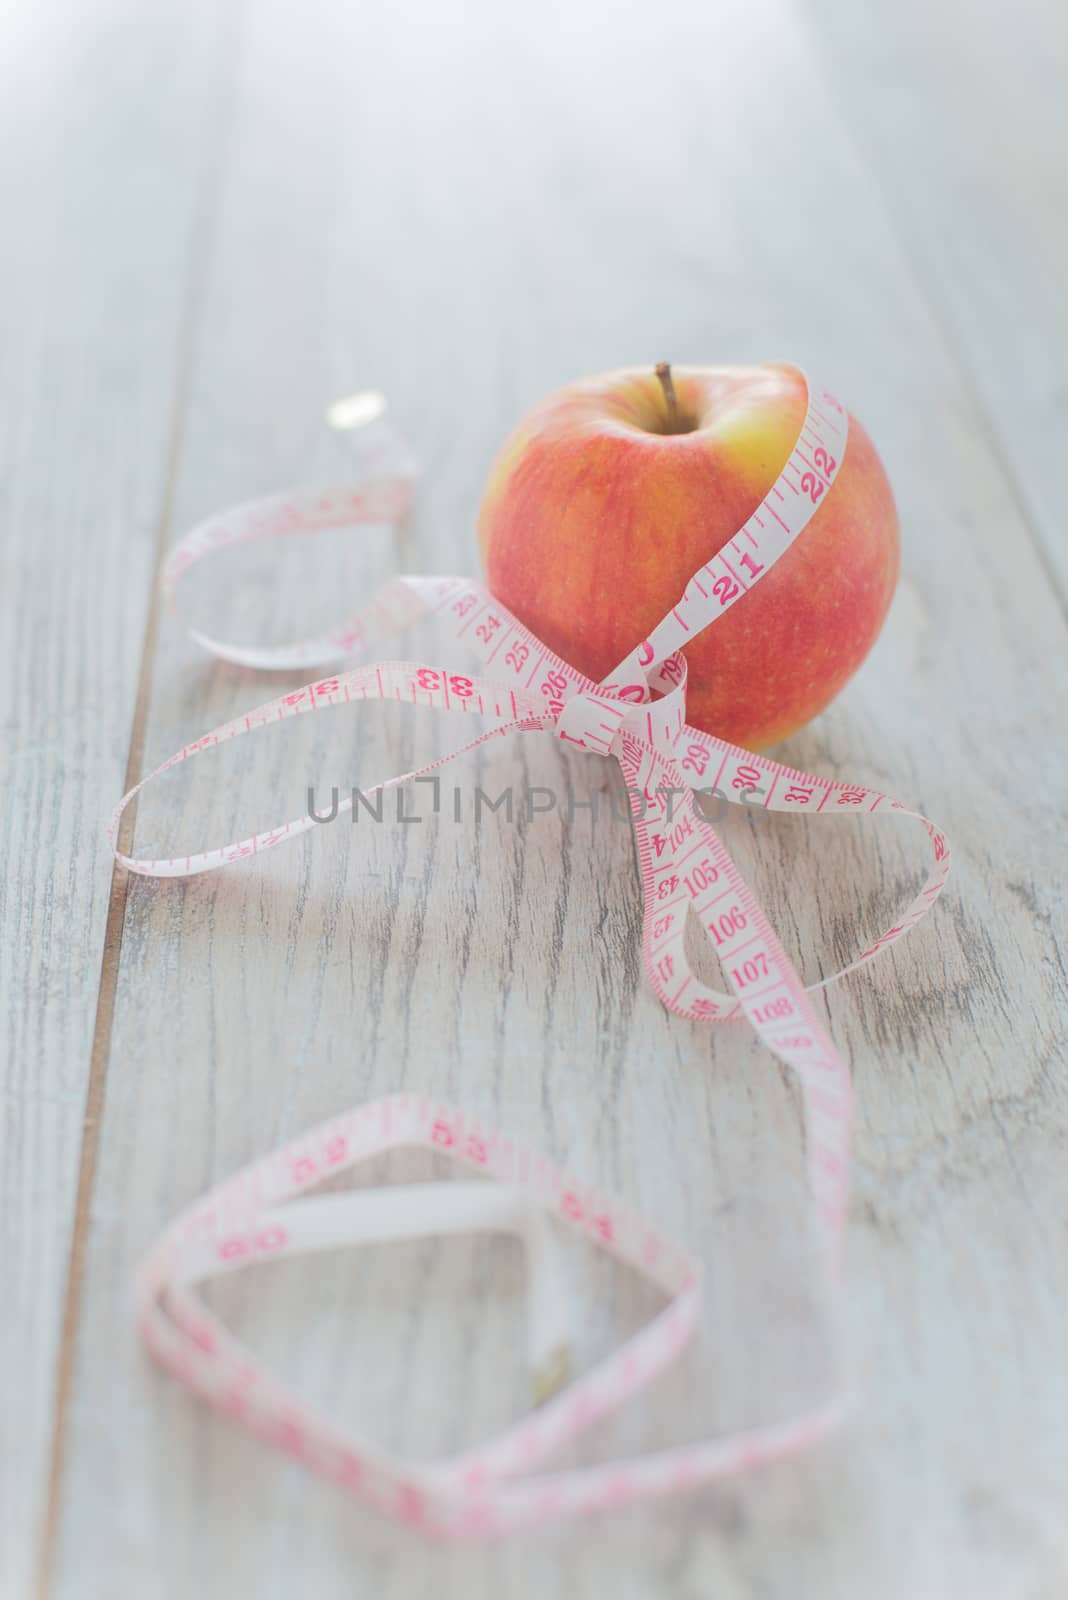 Apple in the measuring tape by Linaga